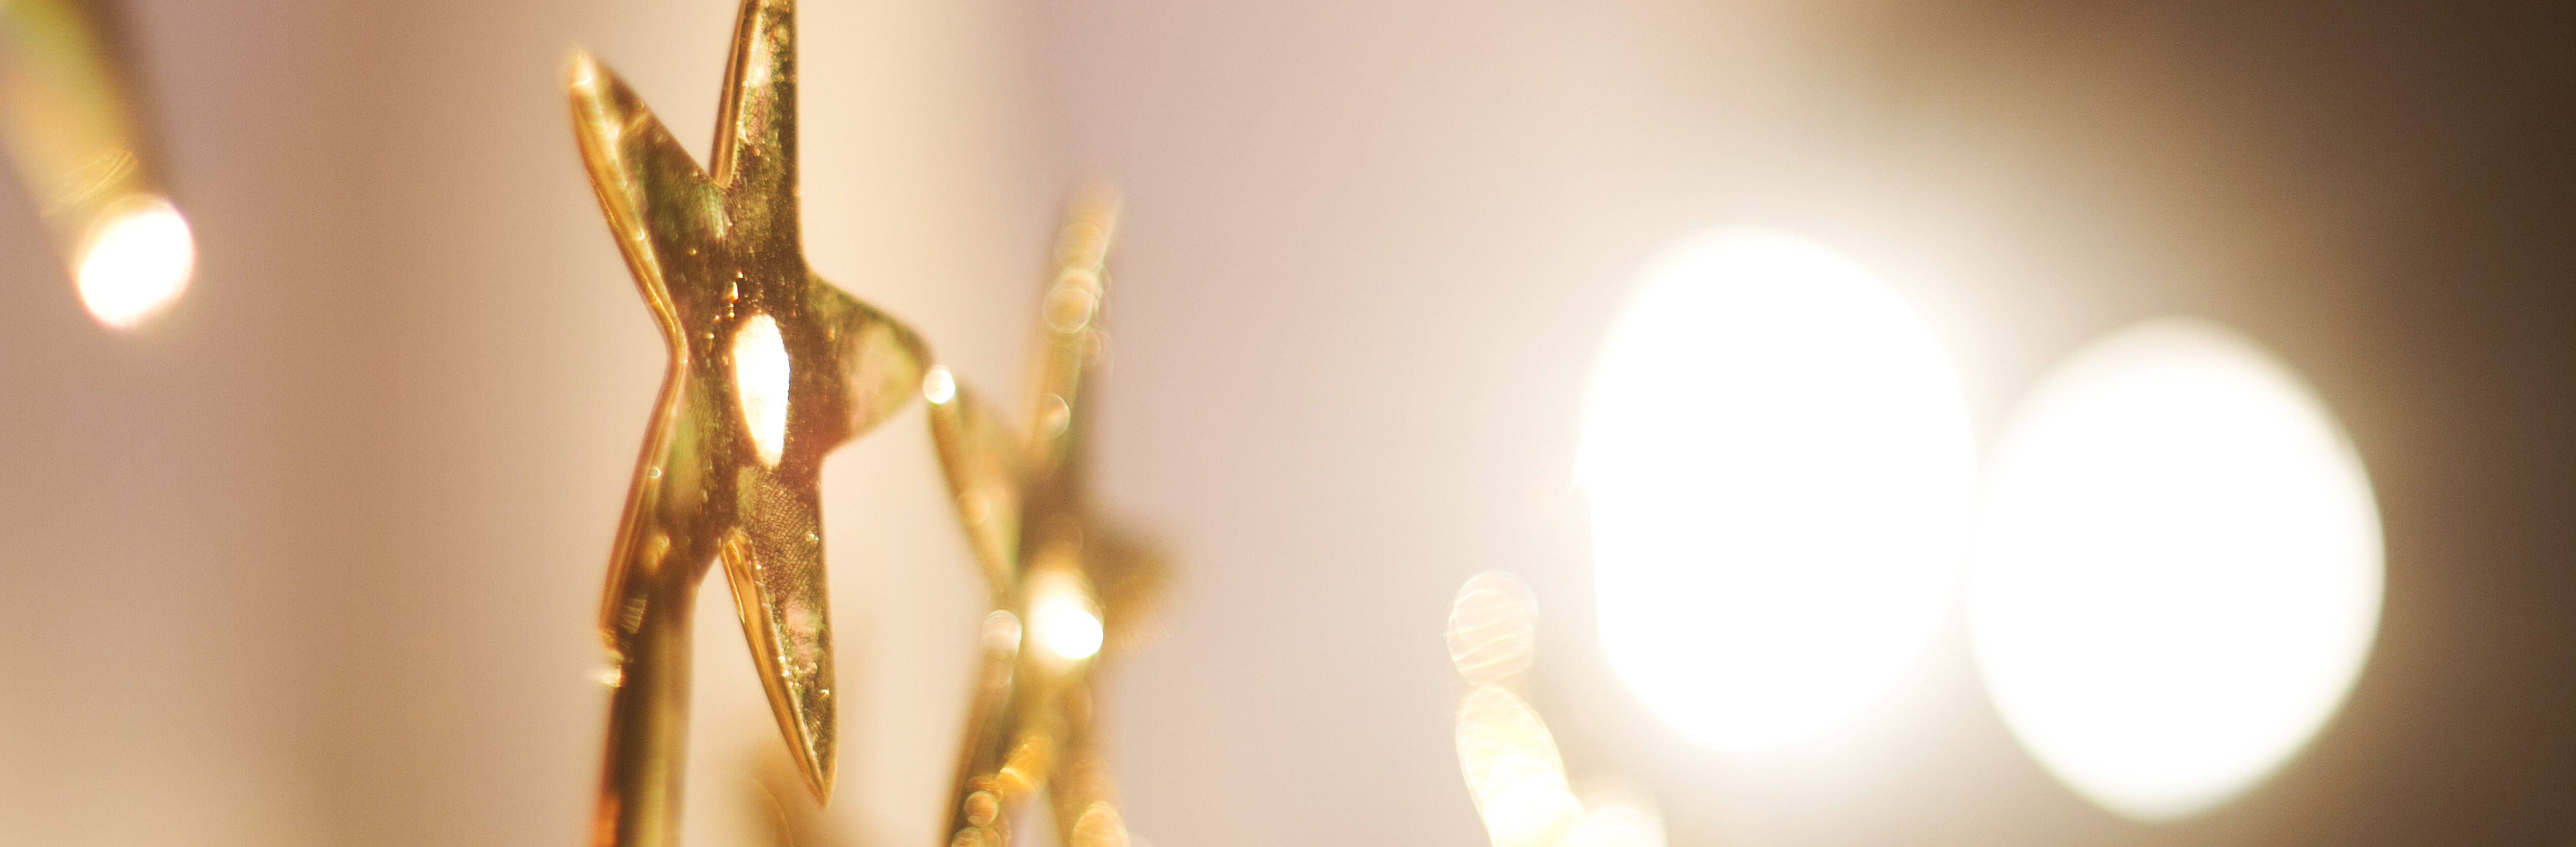 Close up side view of a gold metal star illuminated by bright lights.